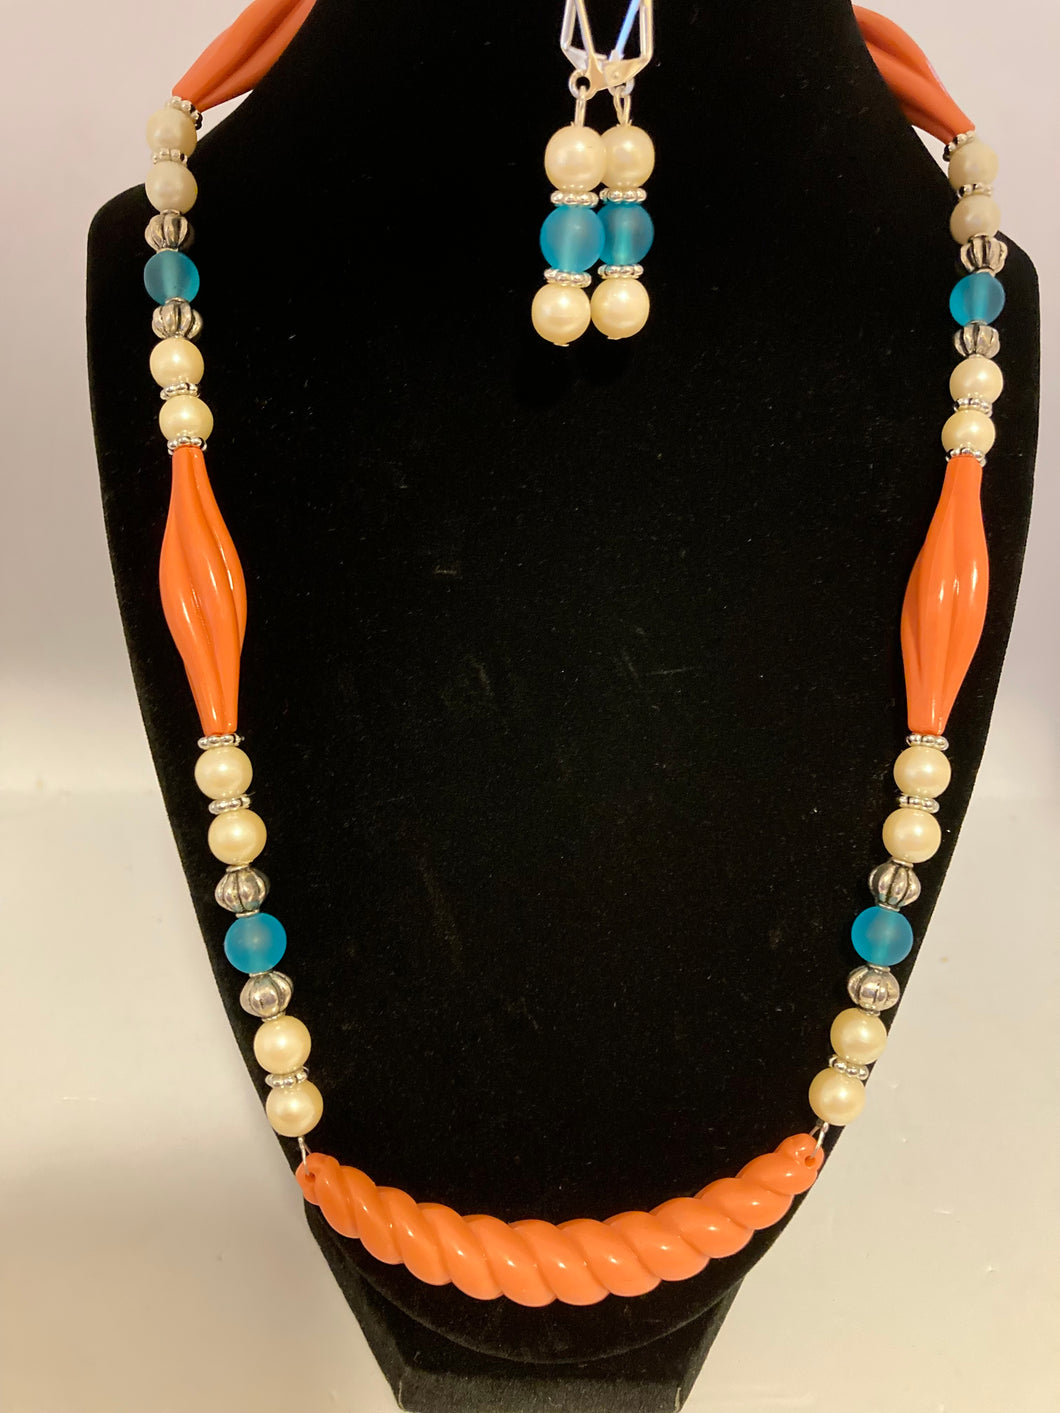 German resin beaded necklace and earrings set